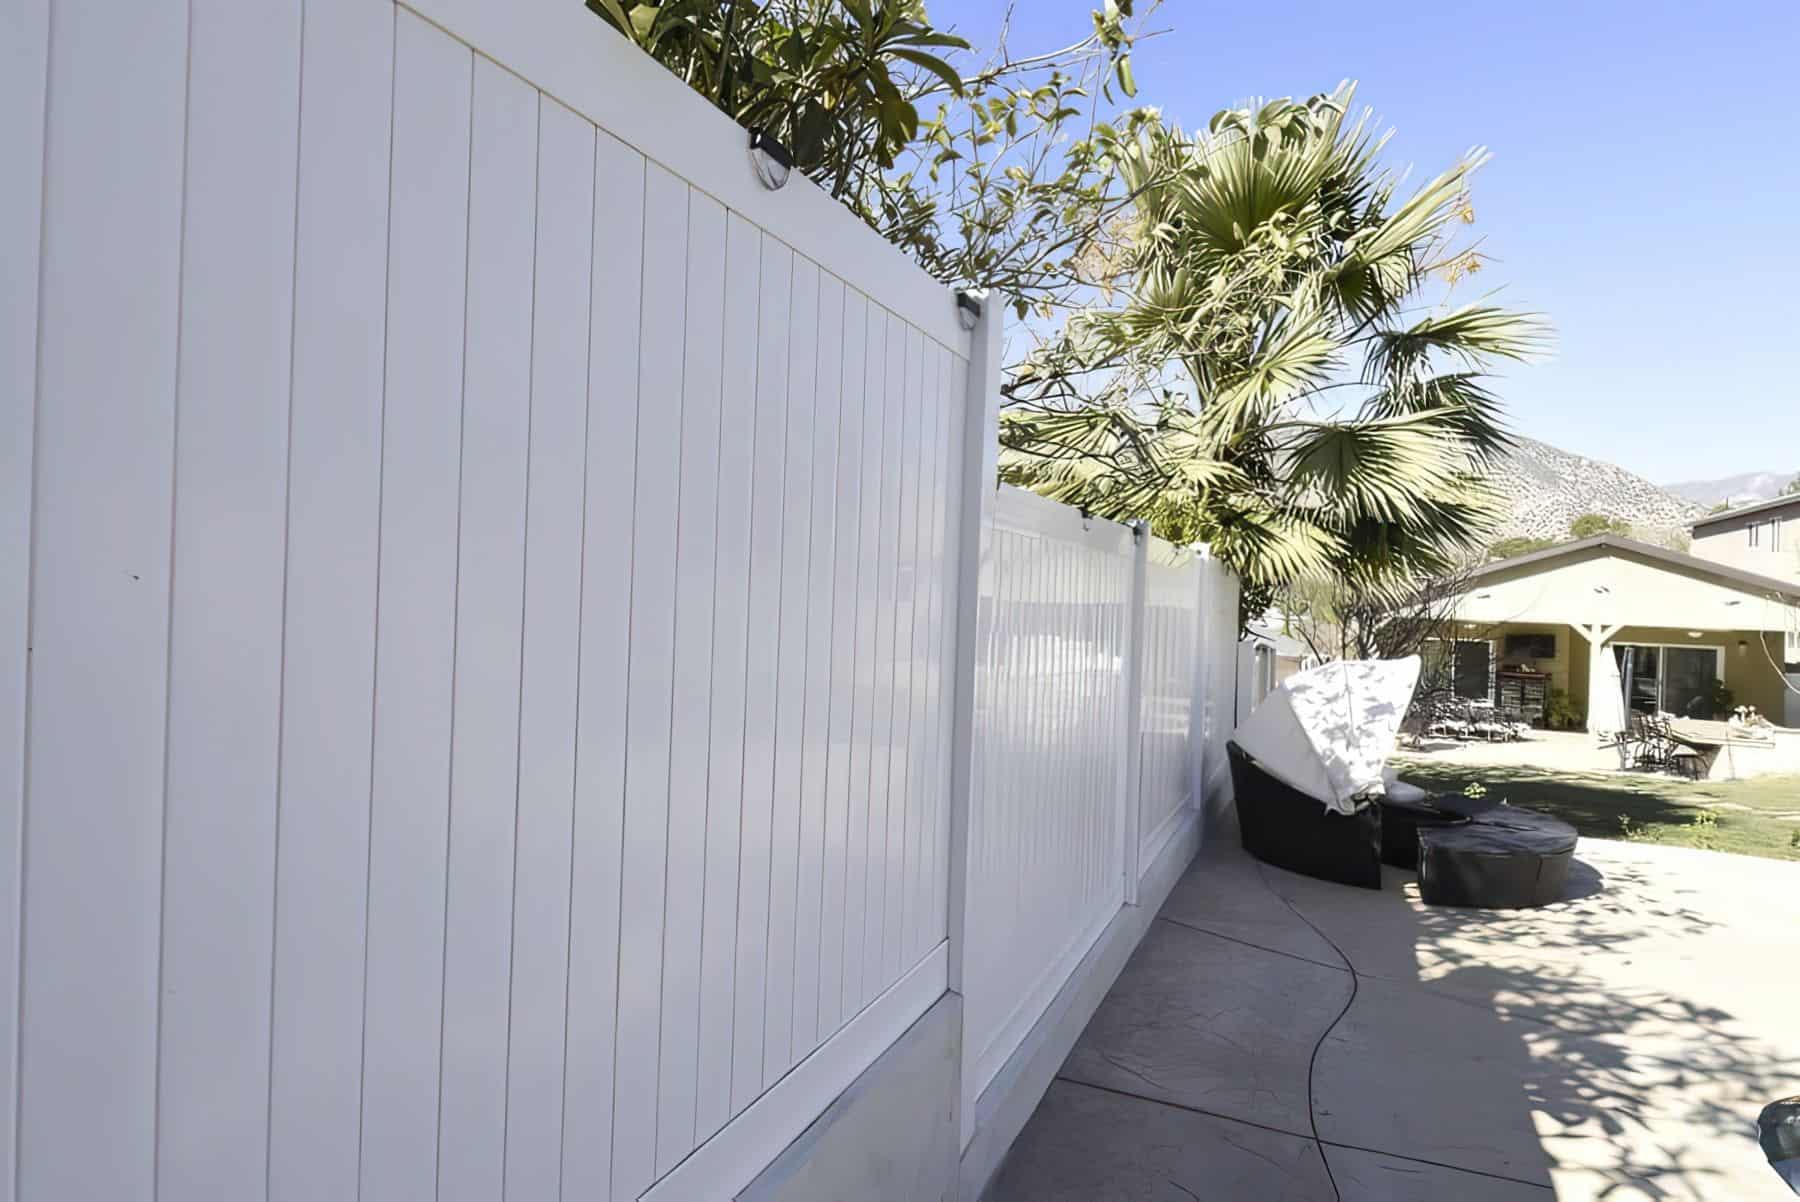 Vinyl privacy fence surrounding large concrete backyard with patches of grass and comfortable seating couches.